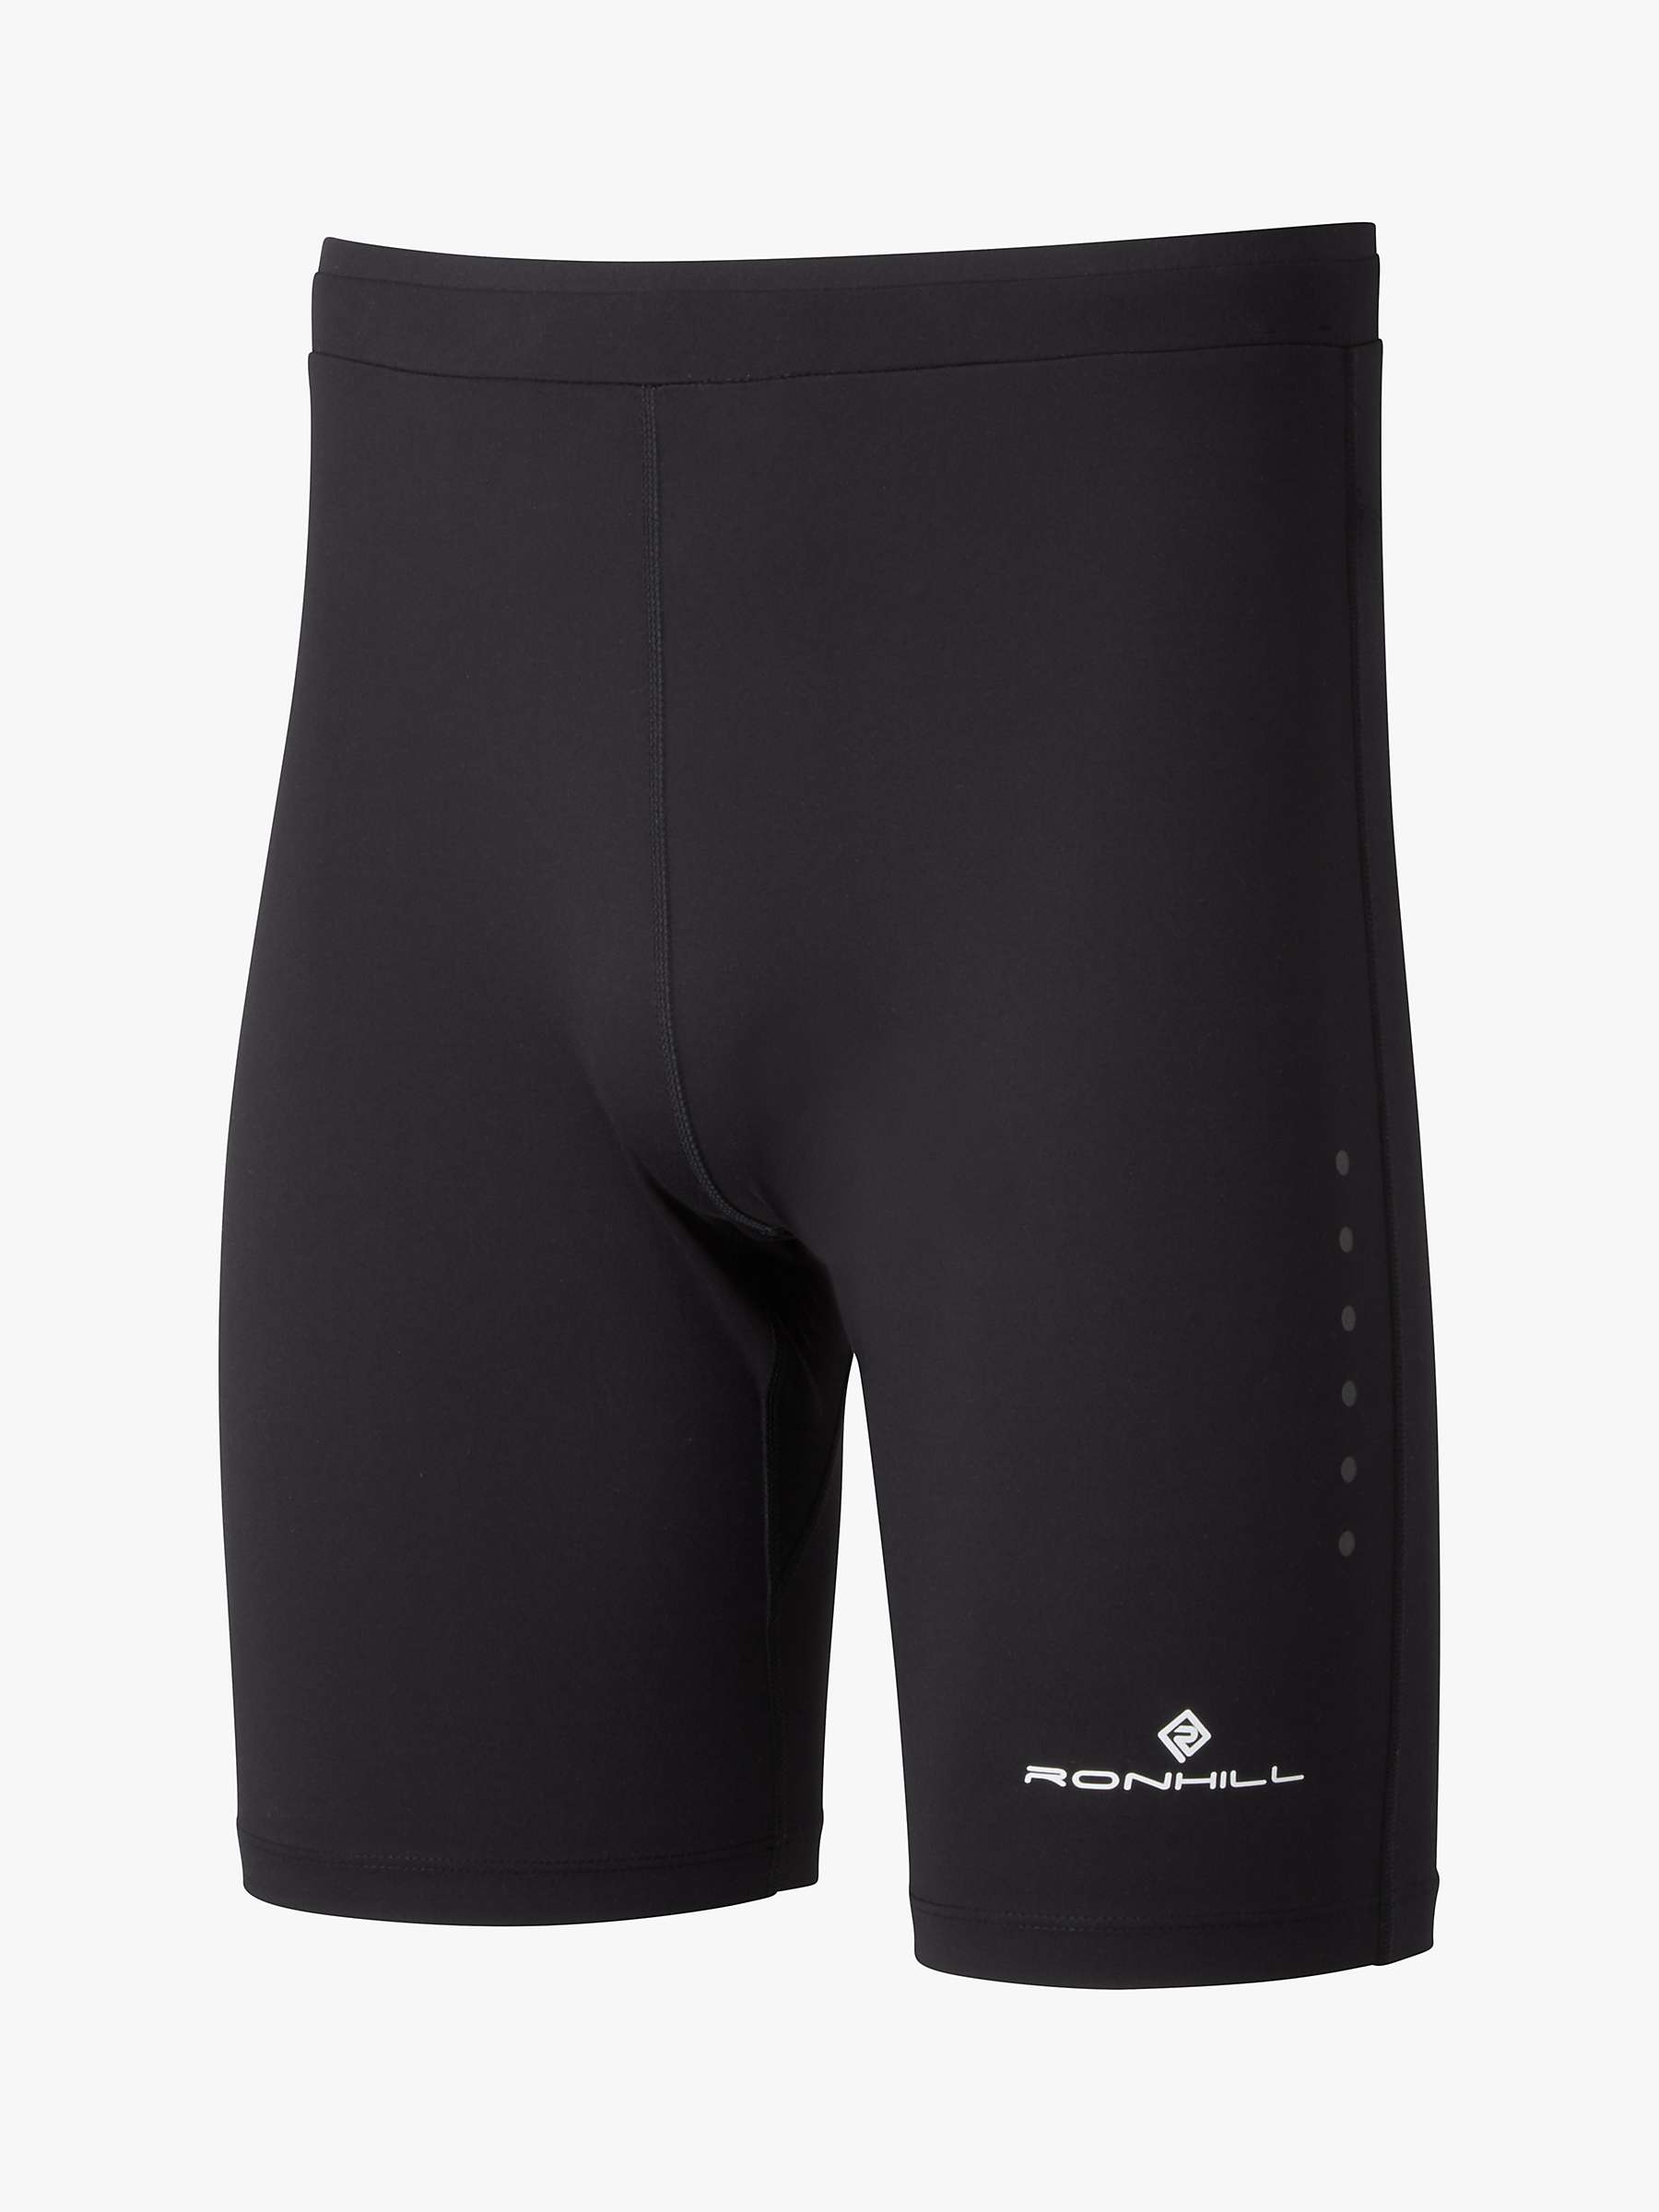 Buy Ronhill Stretch Sports Shorts, Black Online at johnlewis.com